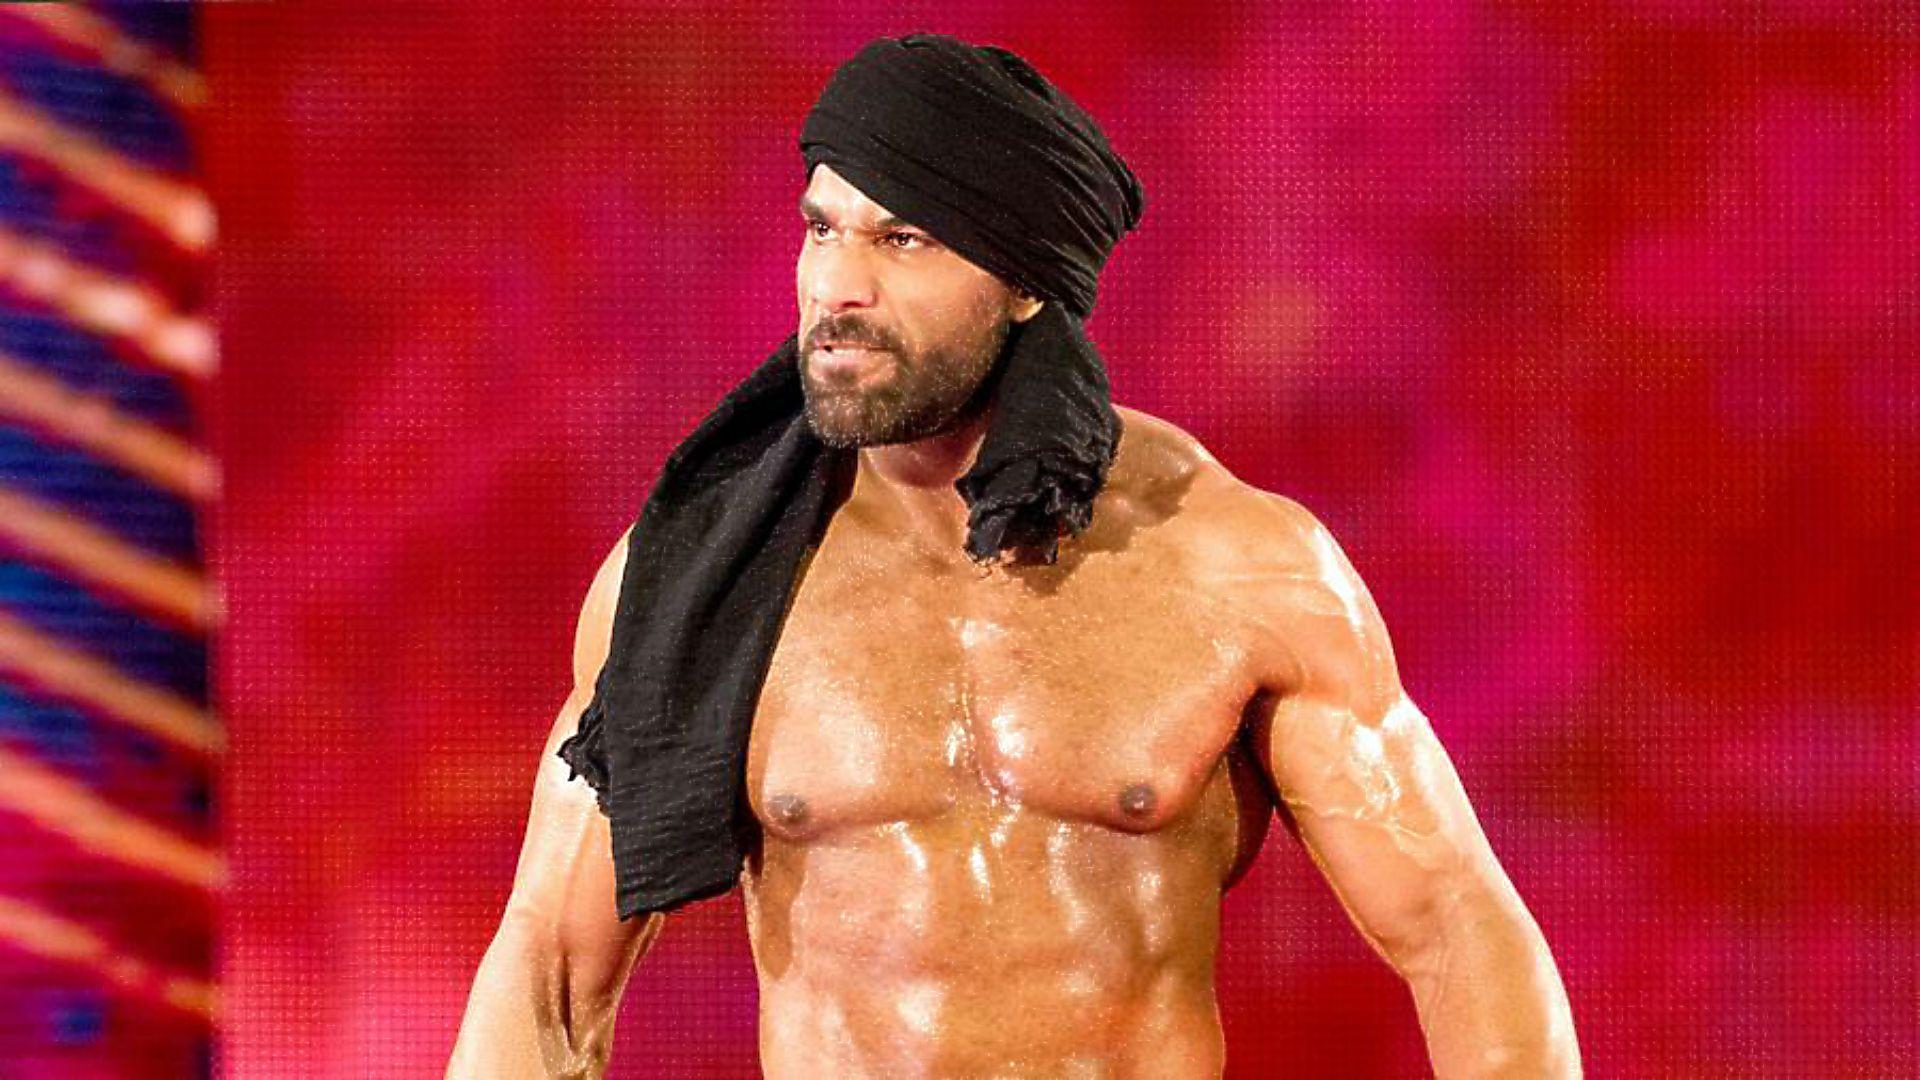 WWE 'SummerSlam' 2017: Jinder Mahal discusses his unique rise to.